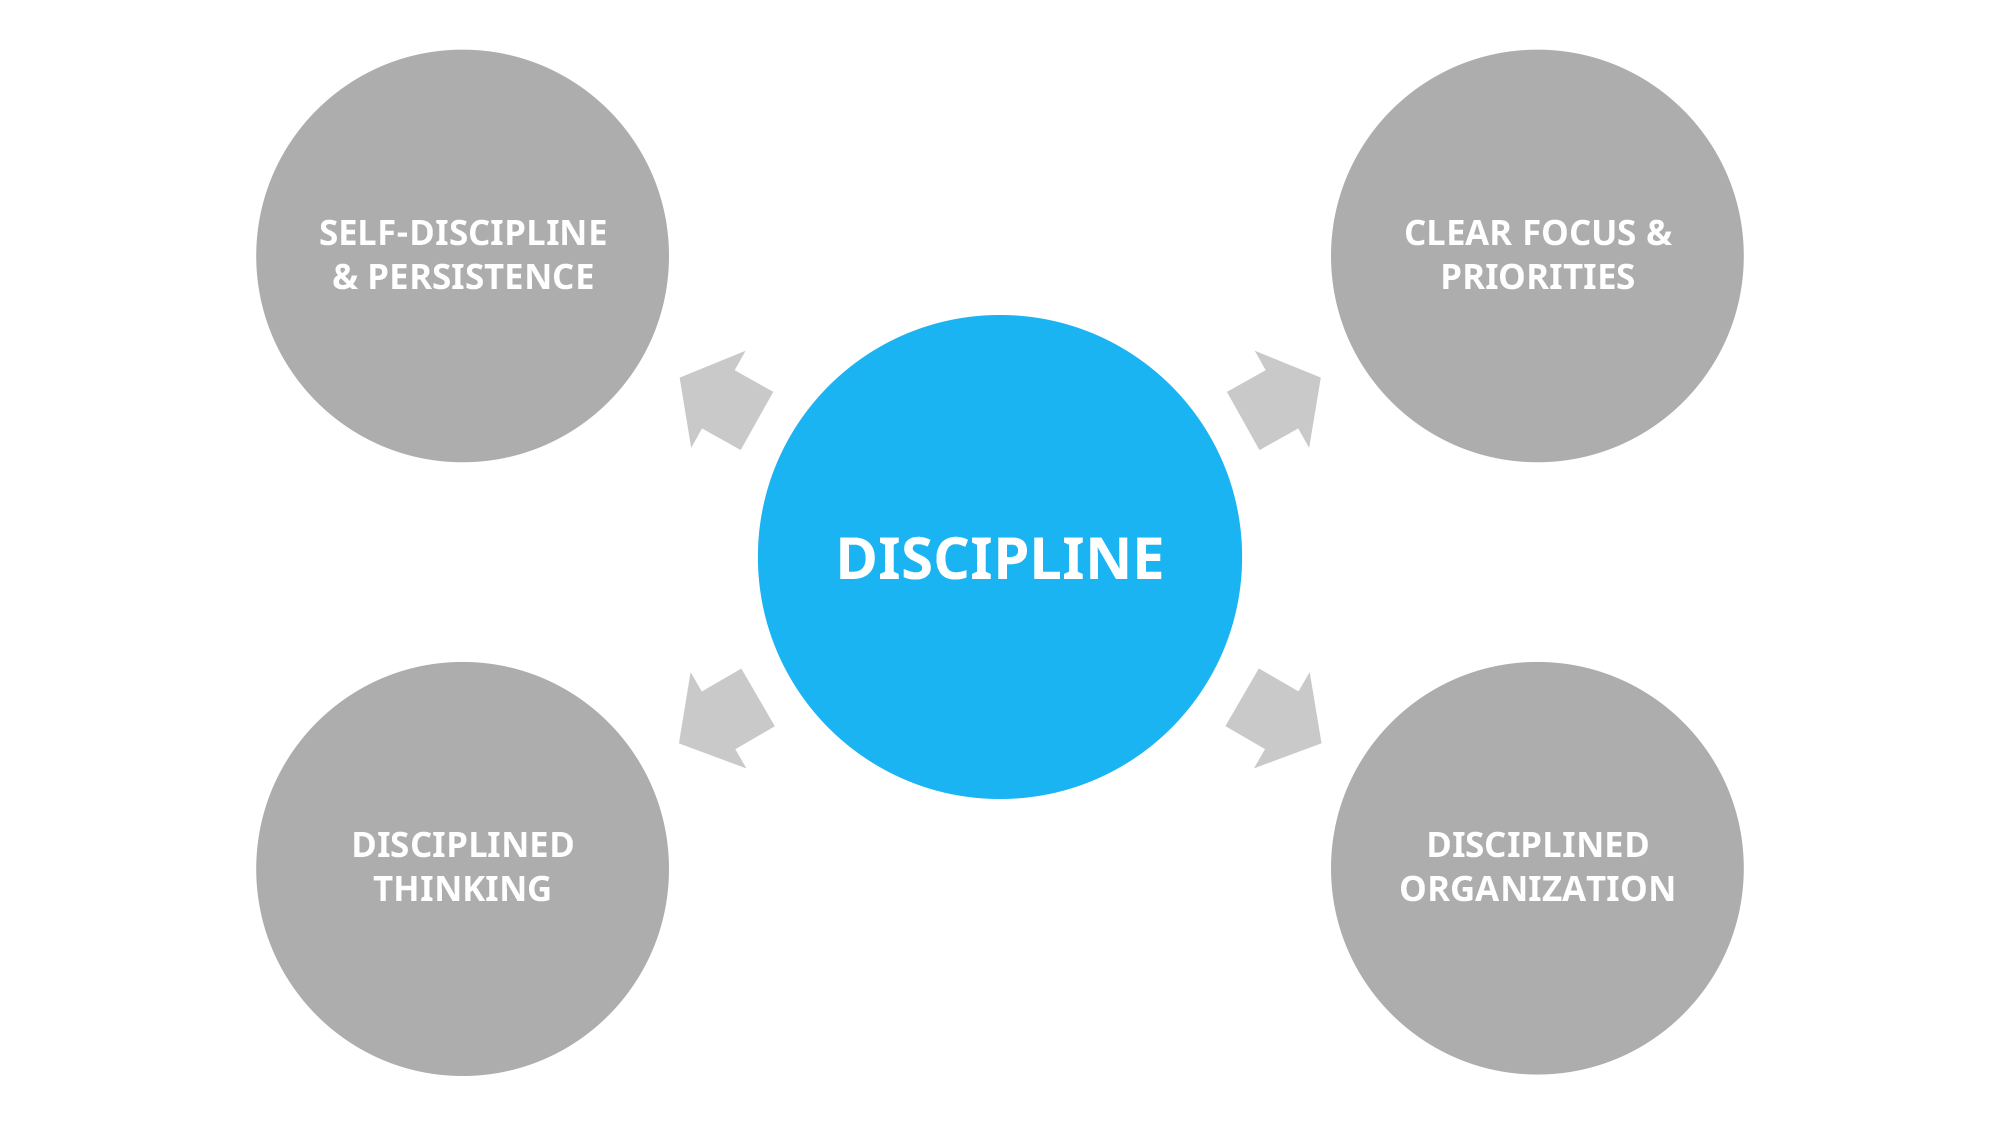 Discipline is important for innovation